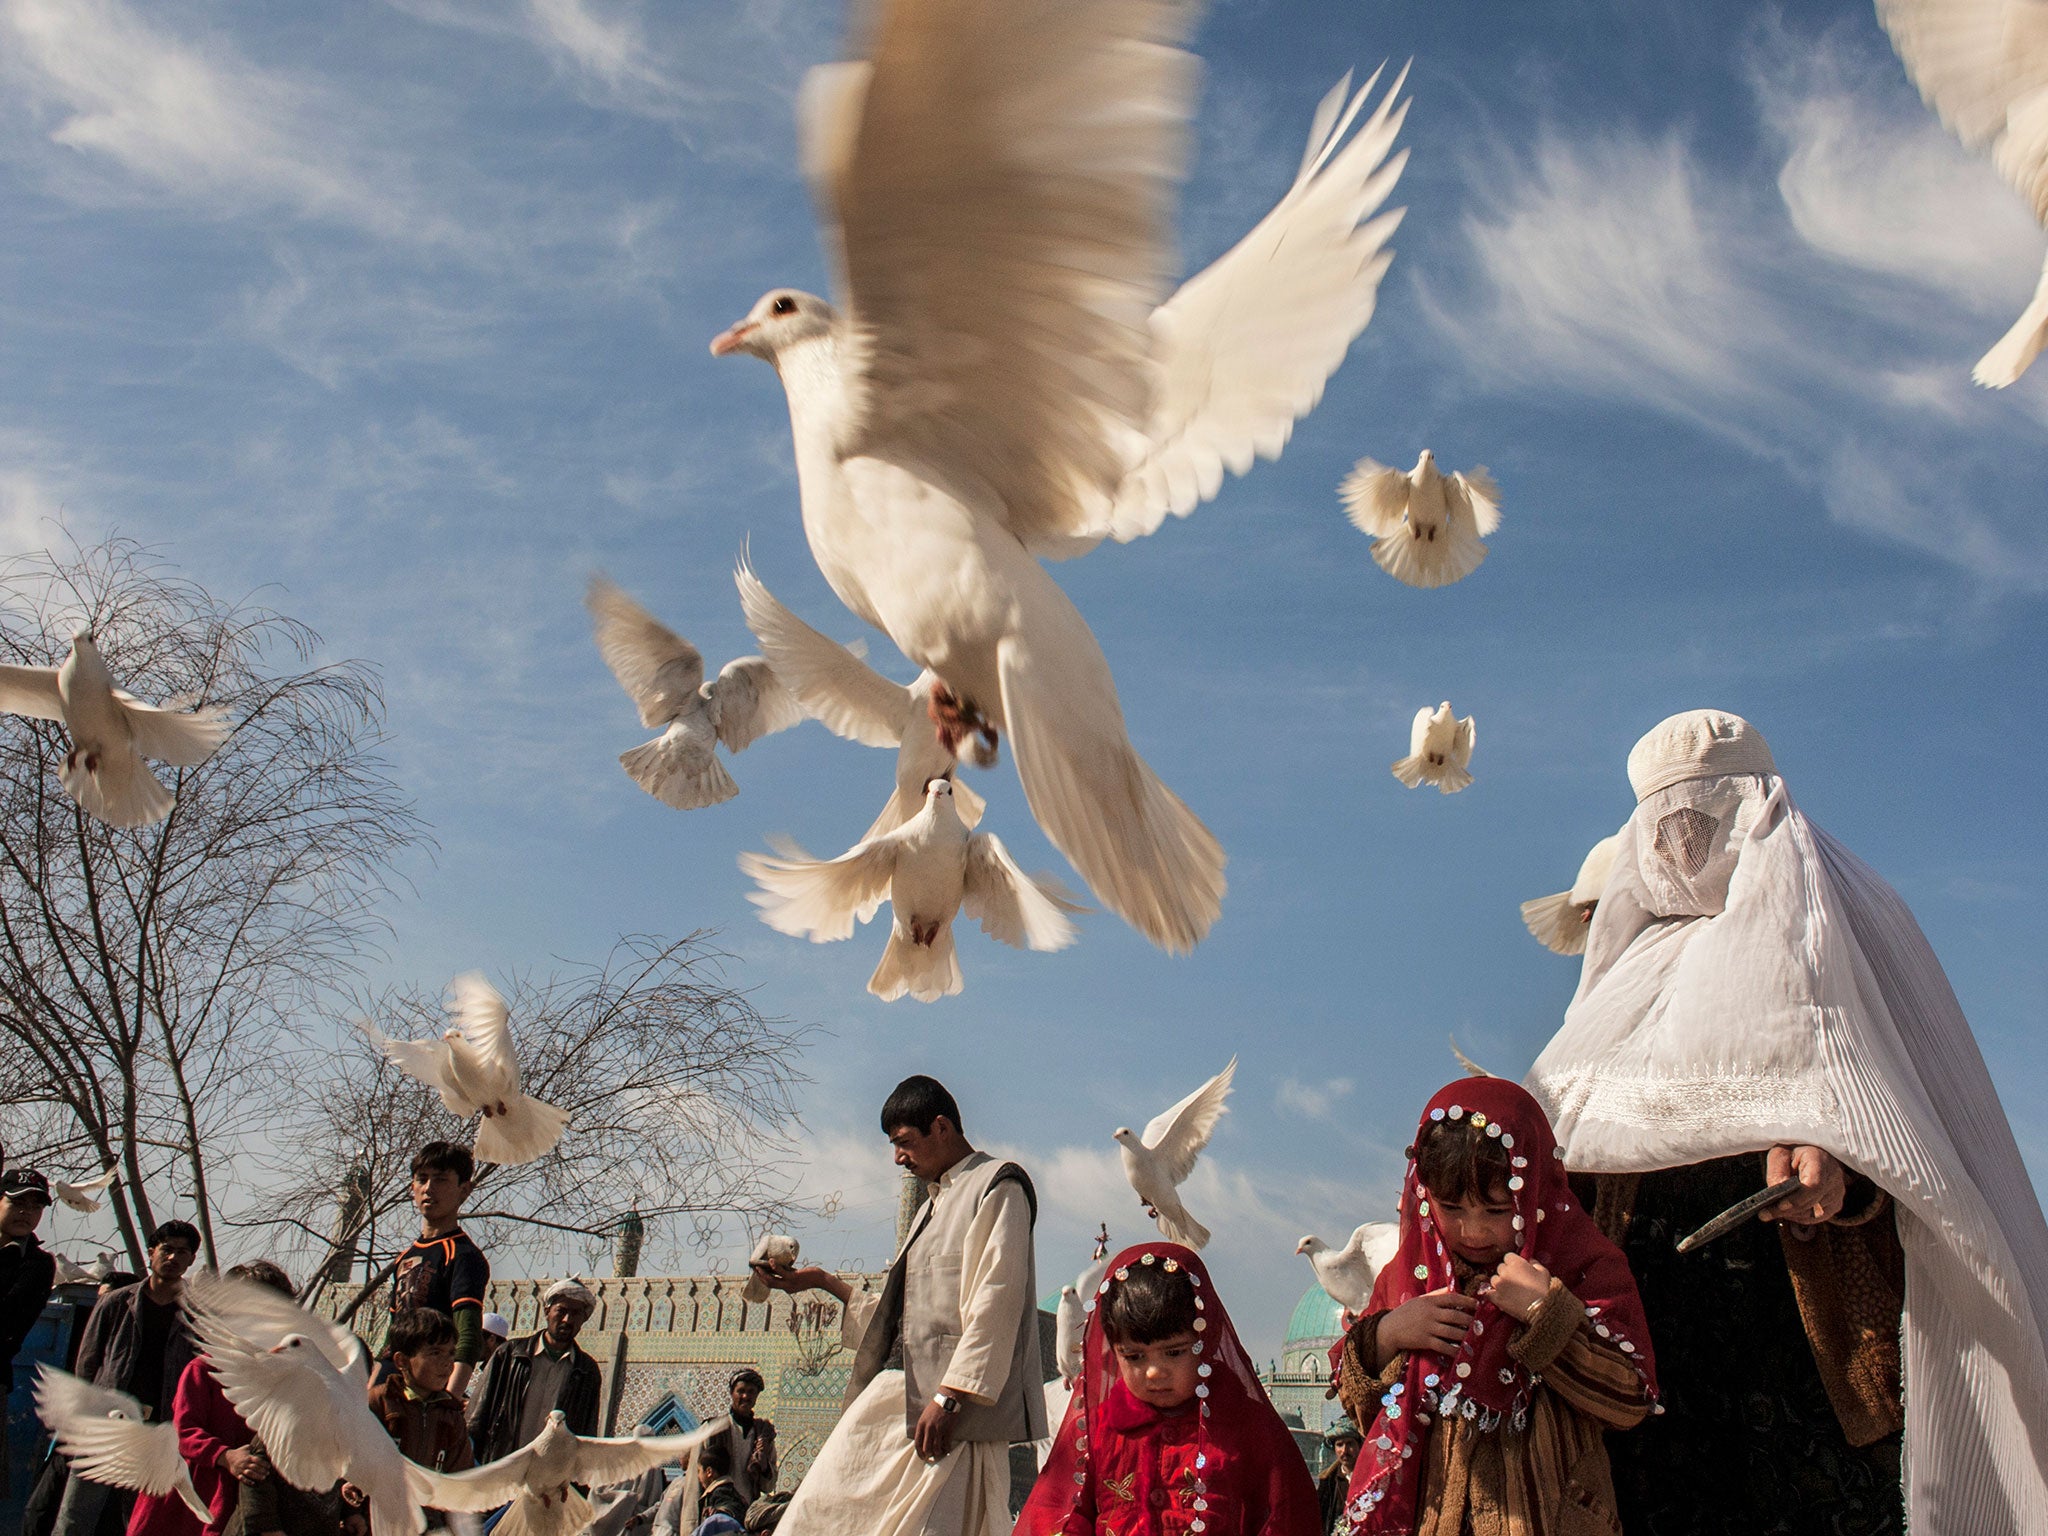 A woman in a white burqa enjoys an afternoon with her family feeding the white pigeons at the Blue Mosque. (Mazar-e-Sharif, March 8, 2008)